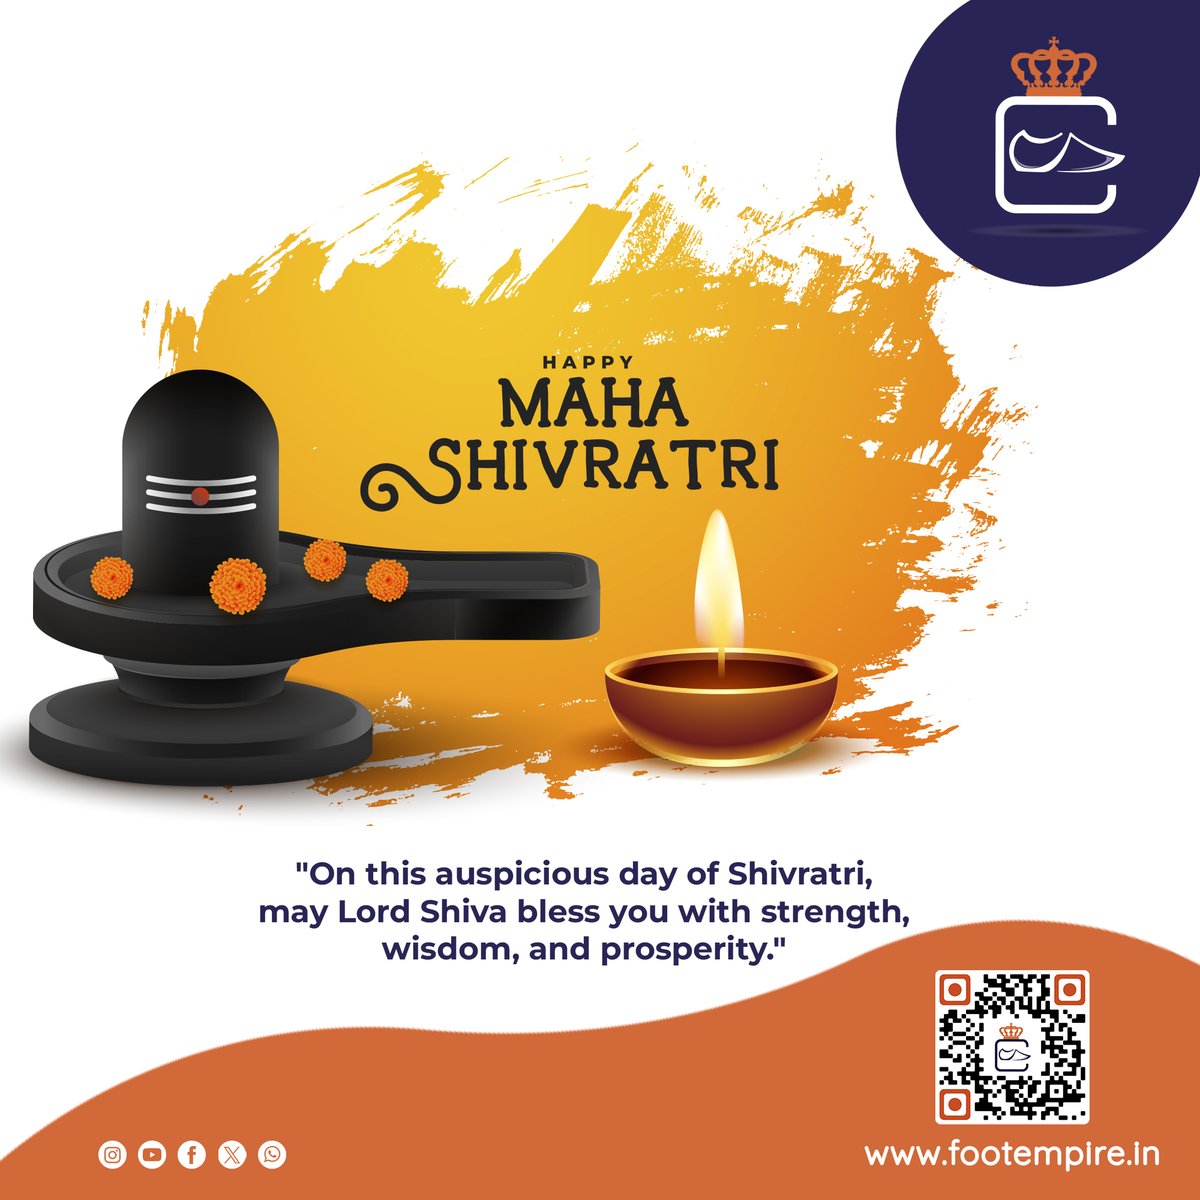 Step into divine comfort this Mahashivratri! Explore our celestial collection of footwear online. 👣✨ #DivineFootwear #MahashivratriSpecial #StepIntoComfort #OnlineShopping #FootwearFashion #FashionBlessings #WalkWithGrace #MahashivratriStyle #FootwearFiesta